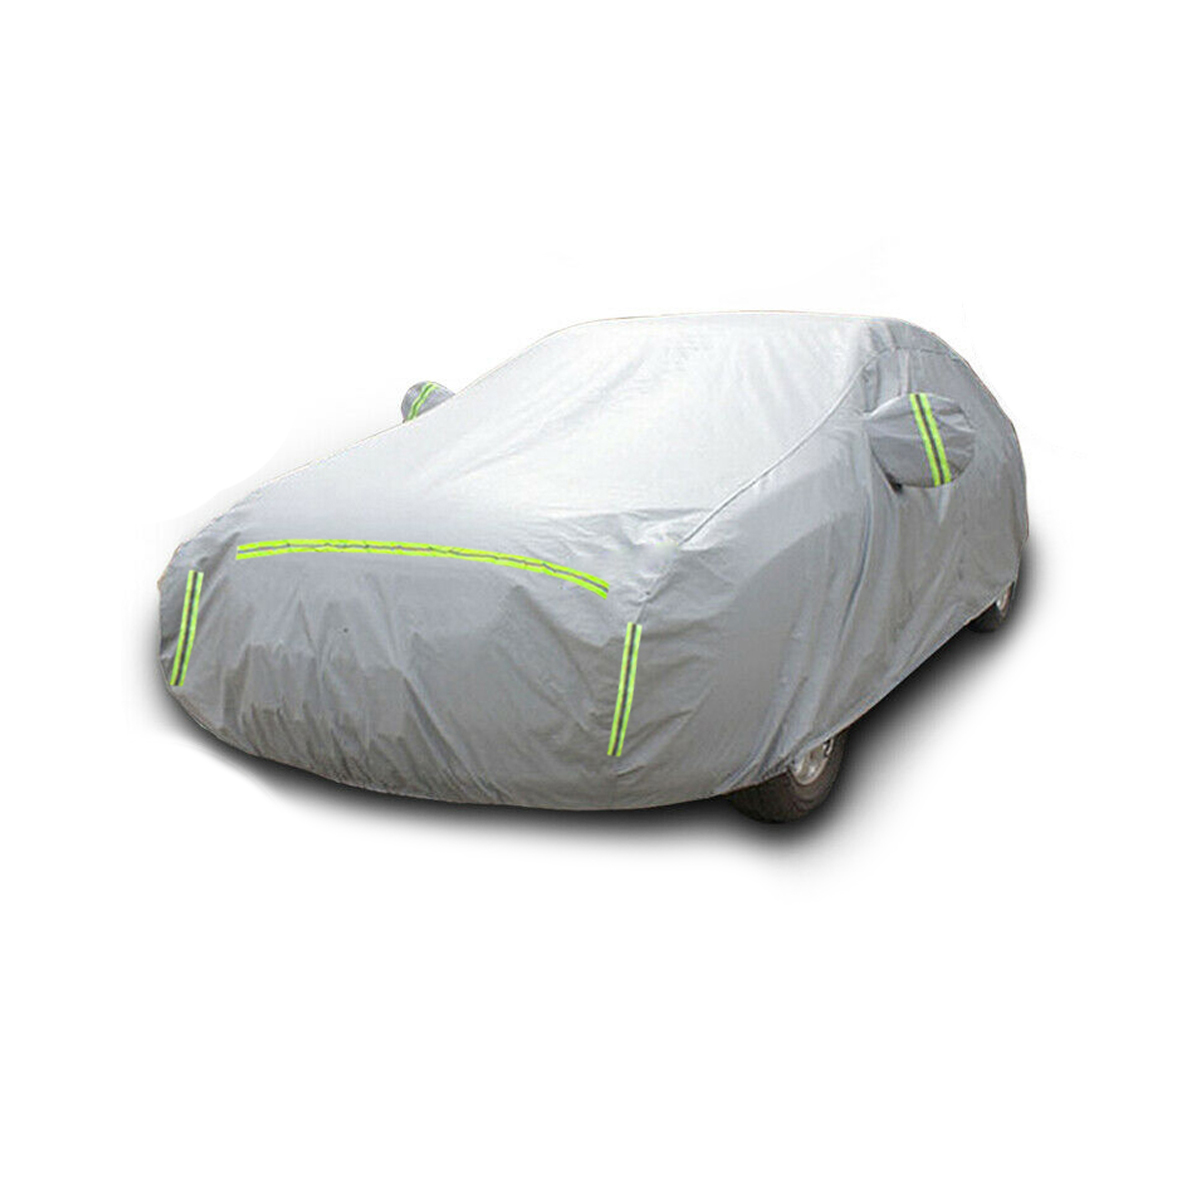 5.1*1.9*1.5M Full Car Cover for Saloon Waterproof Outdoor Dust UV Rain Protector